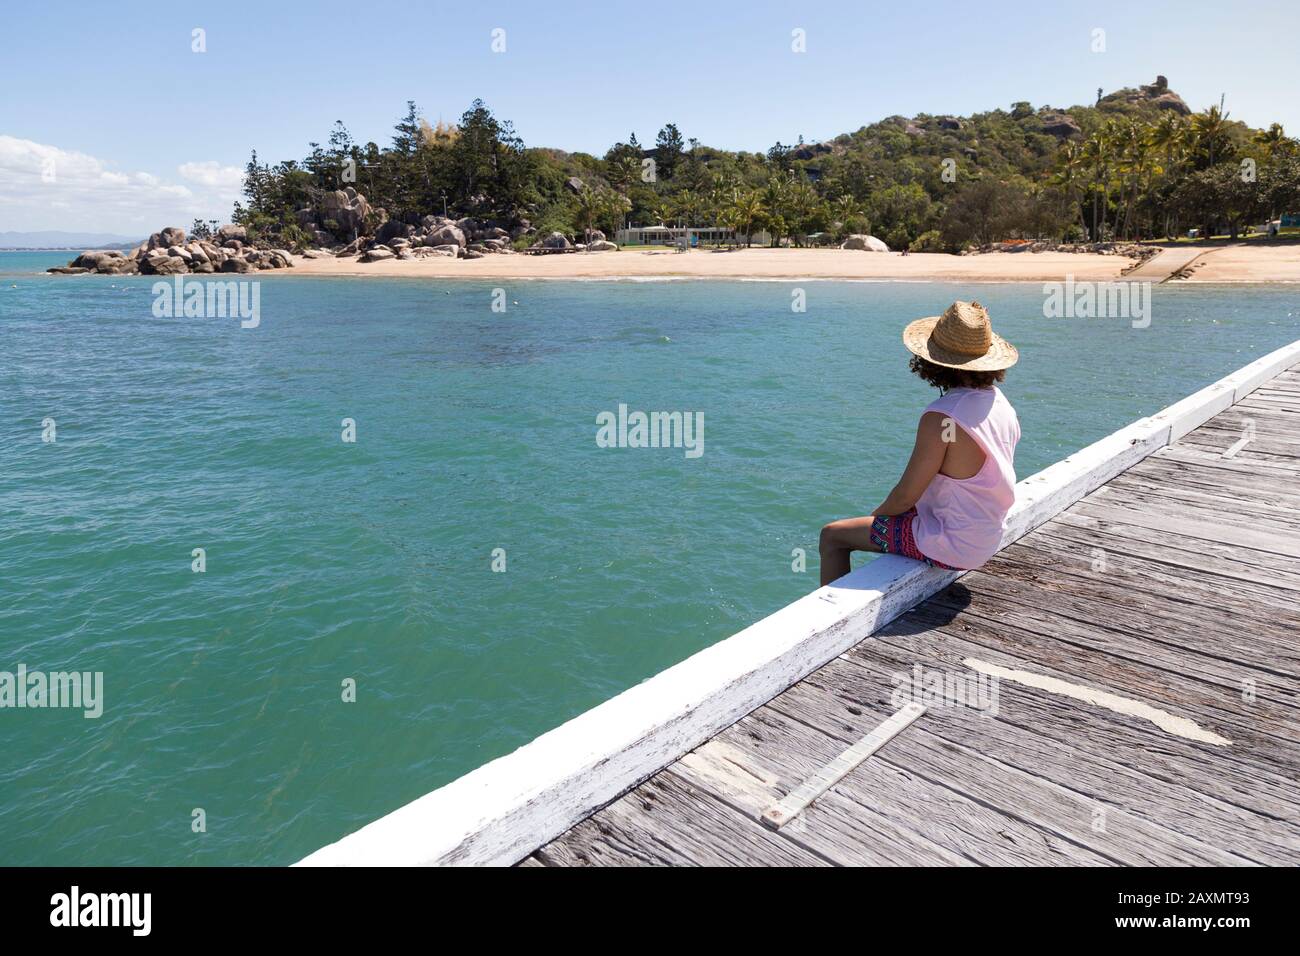 Curly hair man, with sun hat, sitted on edge of wooden dock Stock Photo